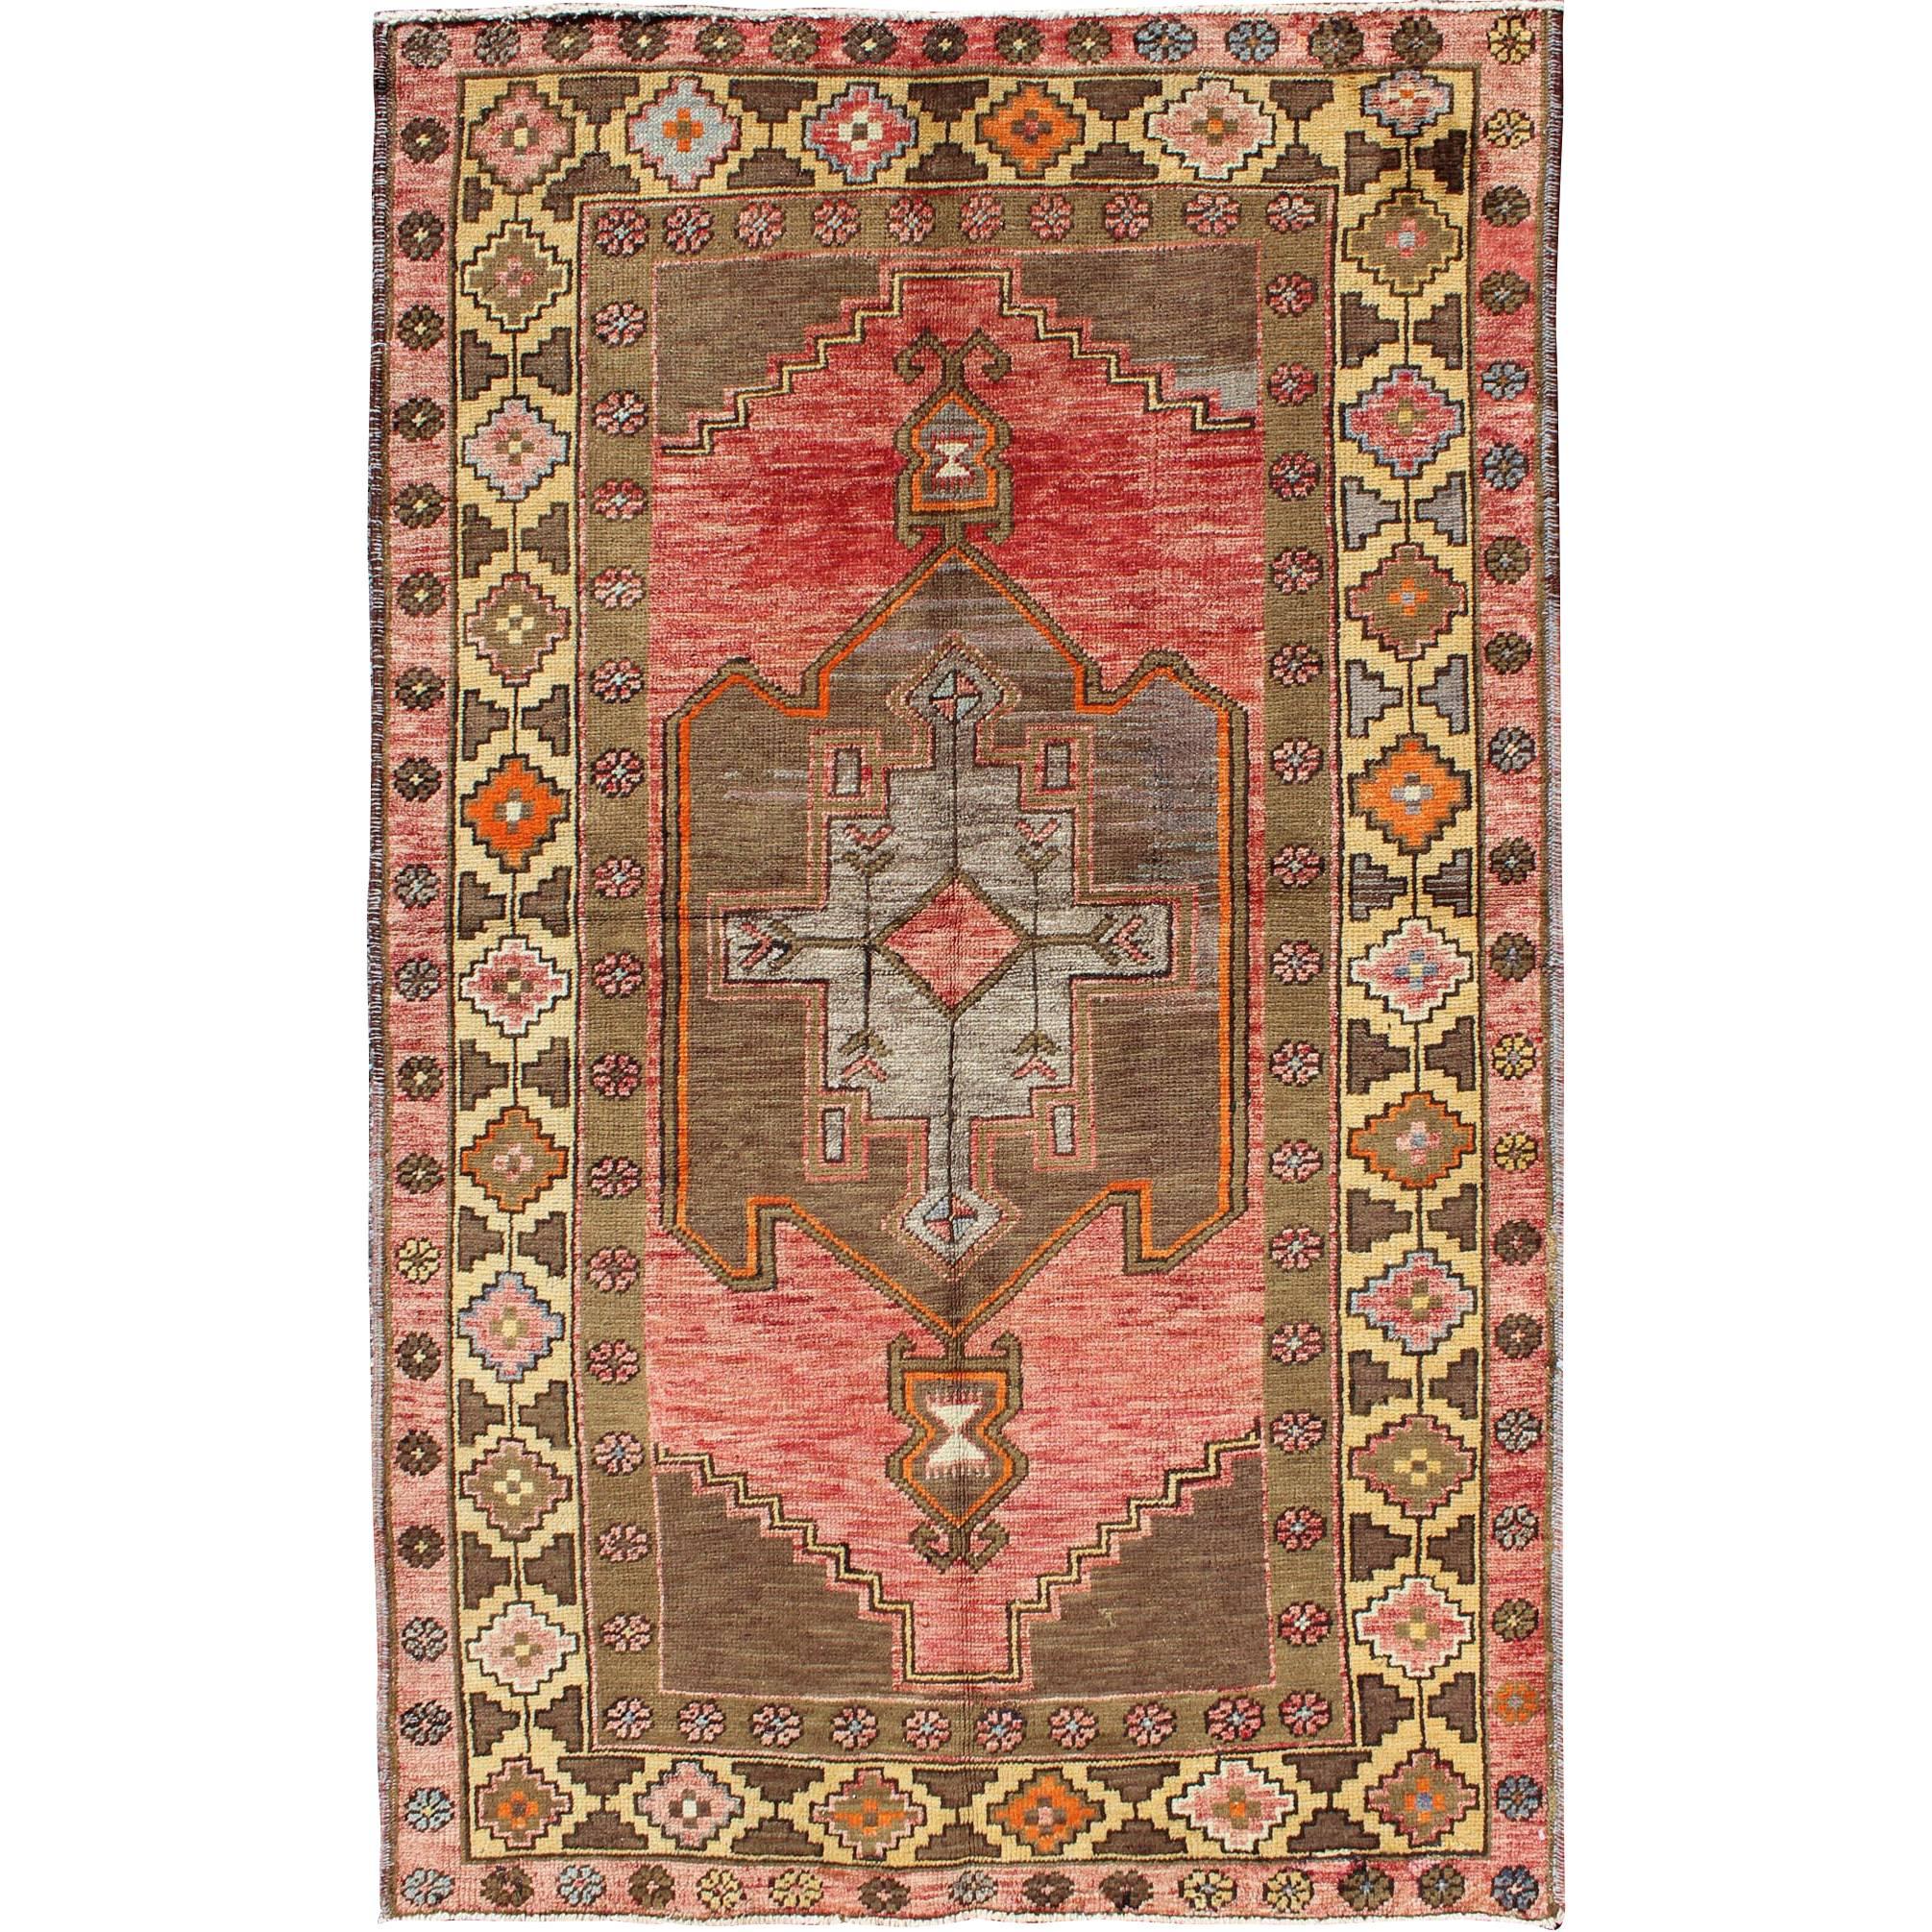 Midcentury Vintage Turkish Oushak Rug with Geometric Florals in Red and Brown